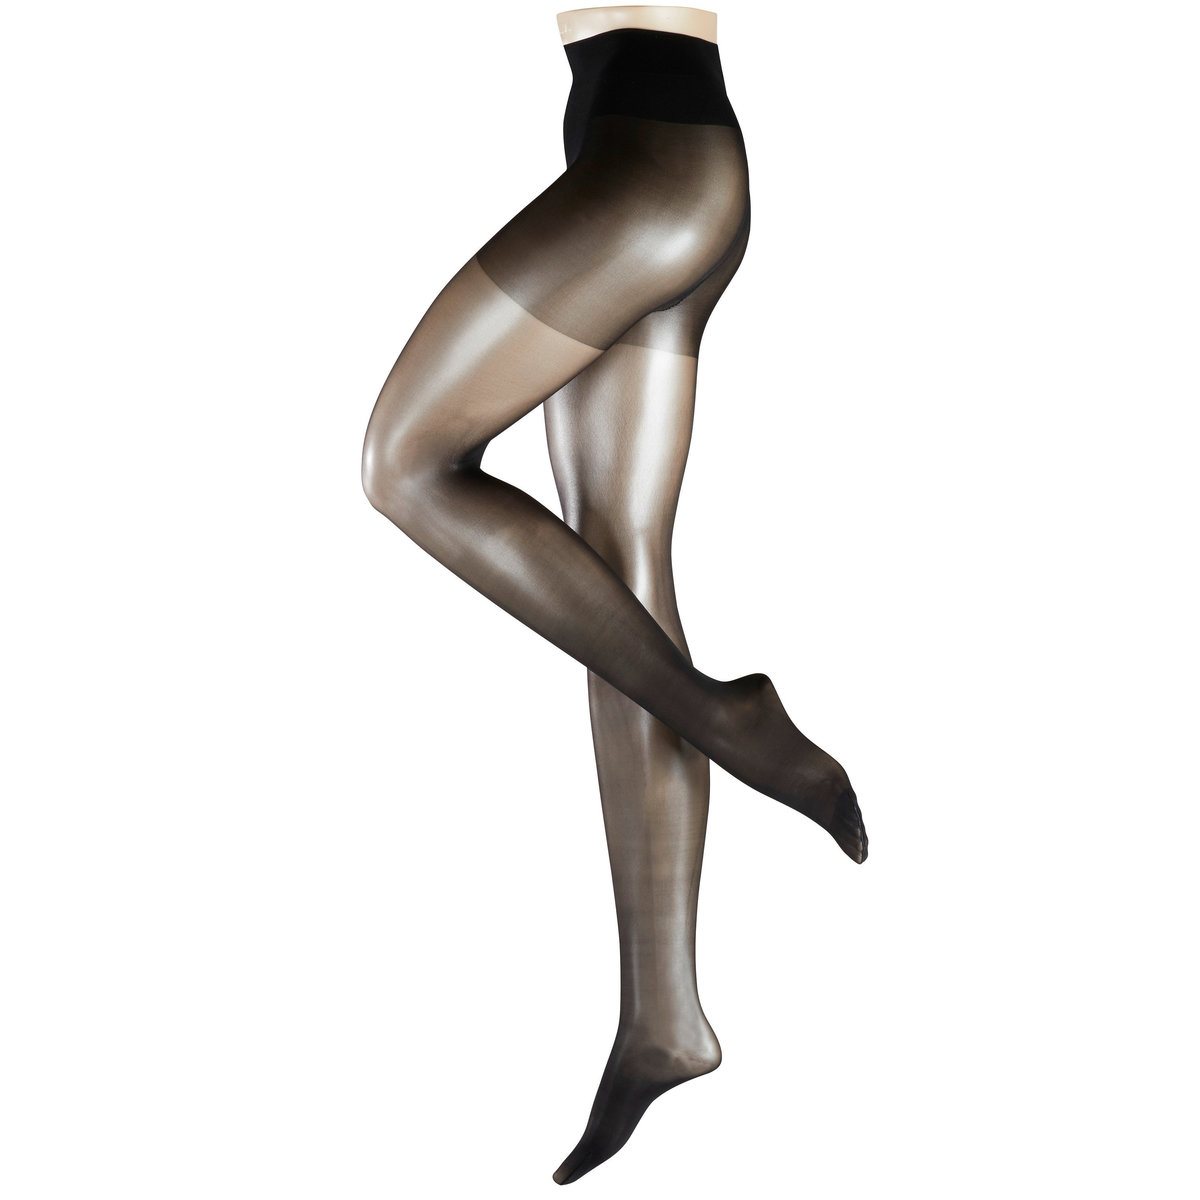 Falke Tights Review: This hosiery can just falke off